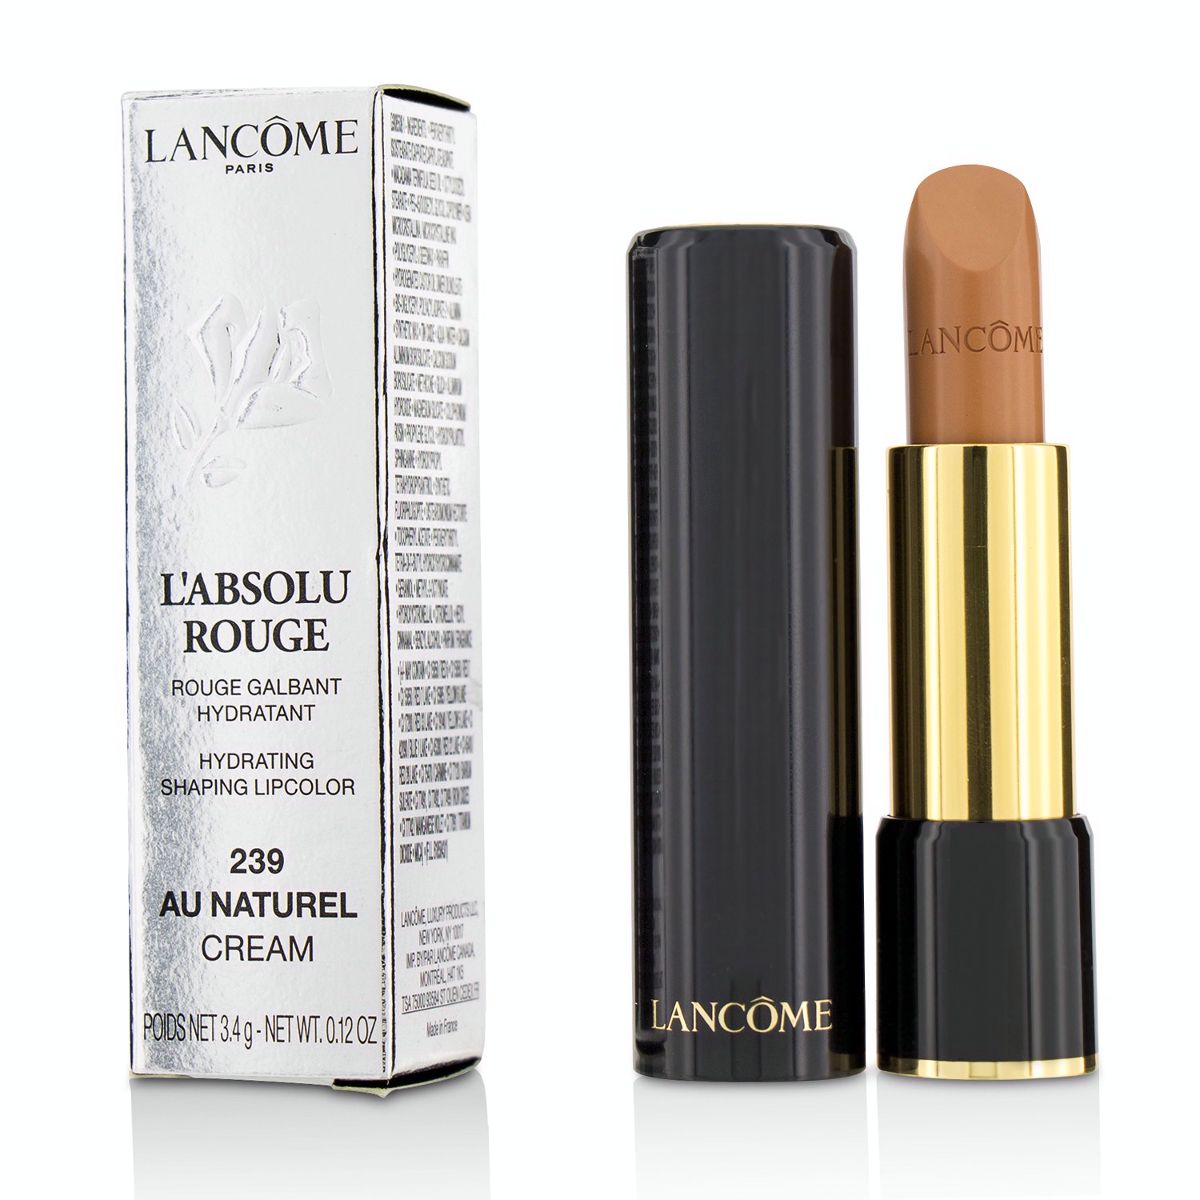 L Absolu Rouge Hydrating Shaping Lipcolor - # 239 Au Naturel (Cream) Lancome Image